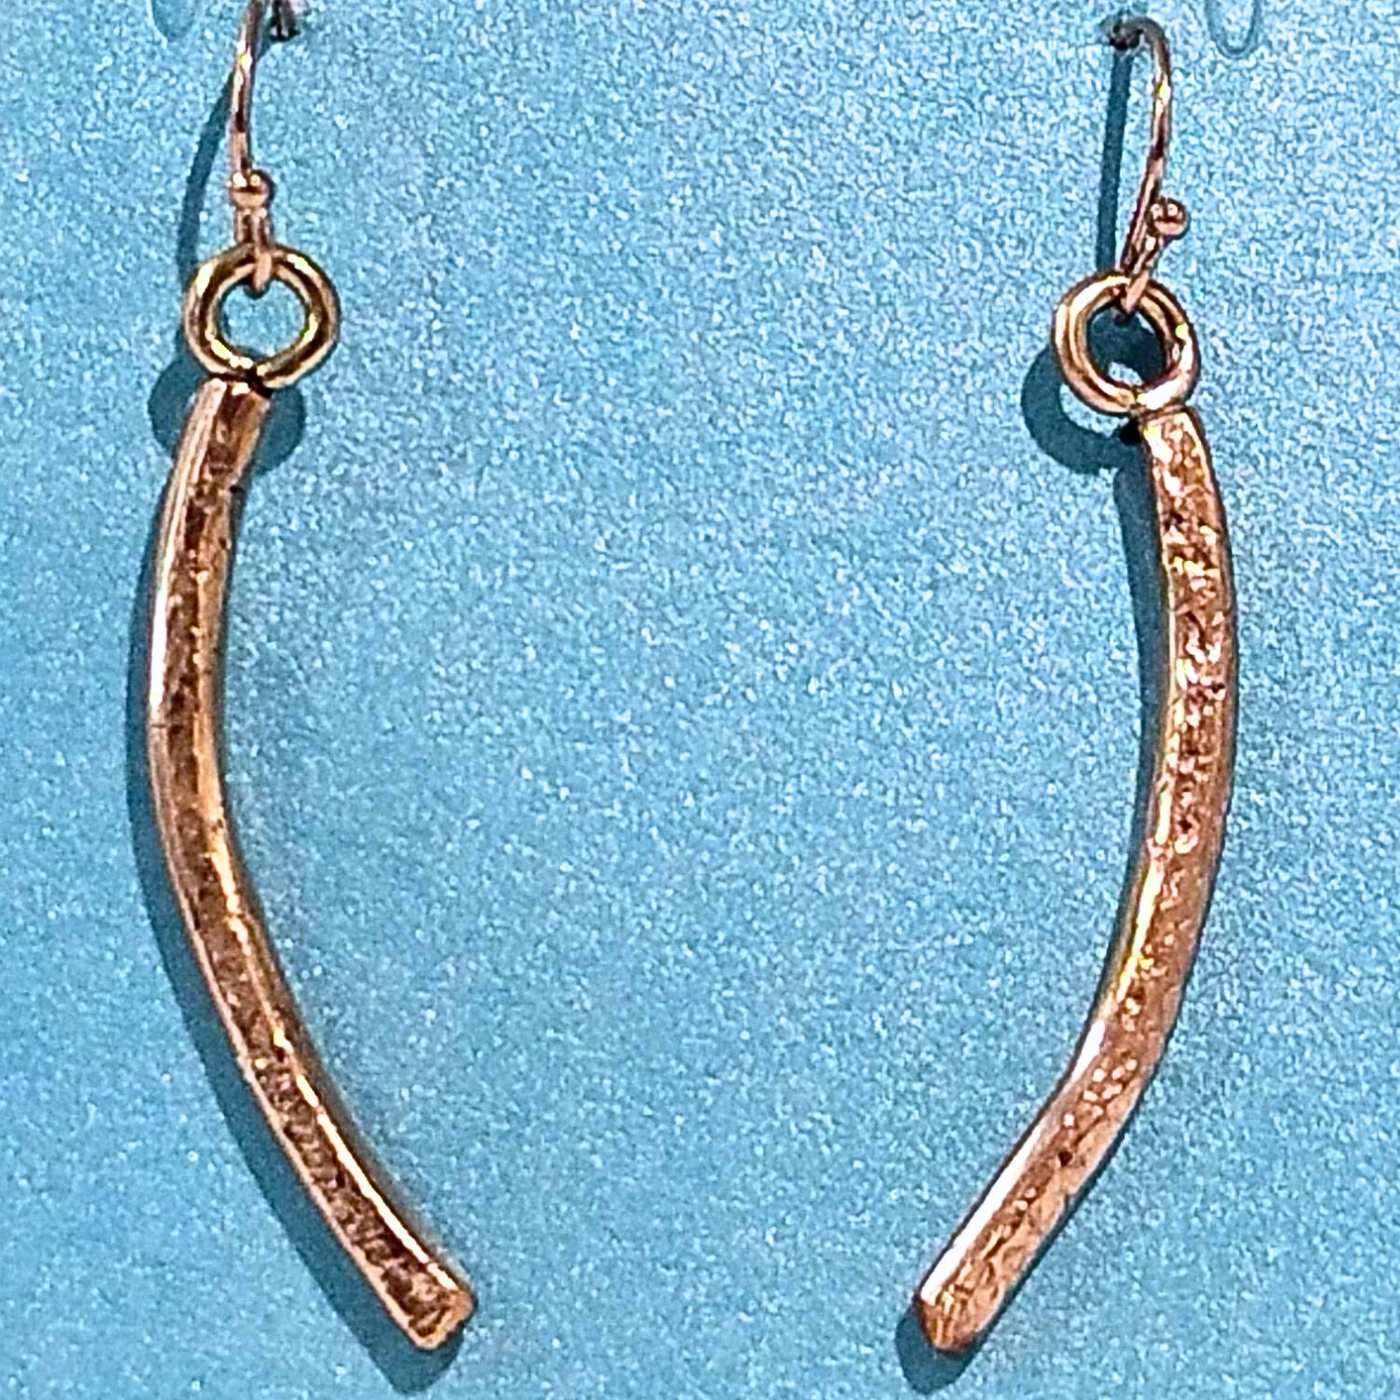 VC-111 Rose Gold Filled Curved Earring